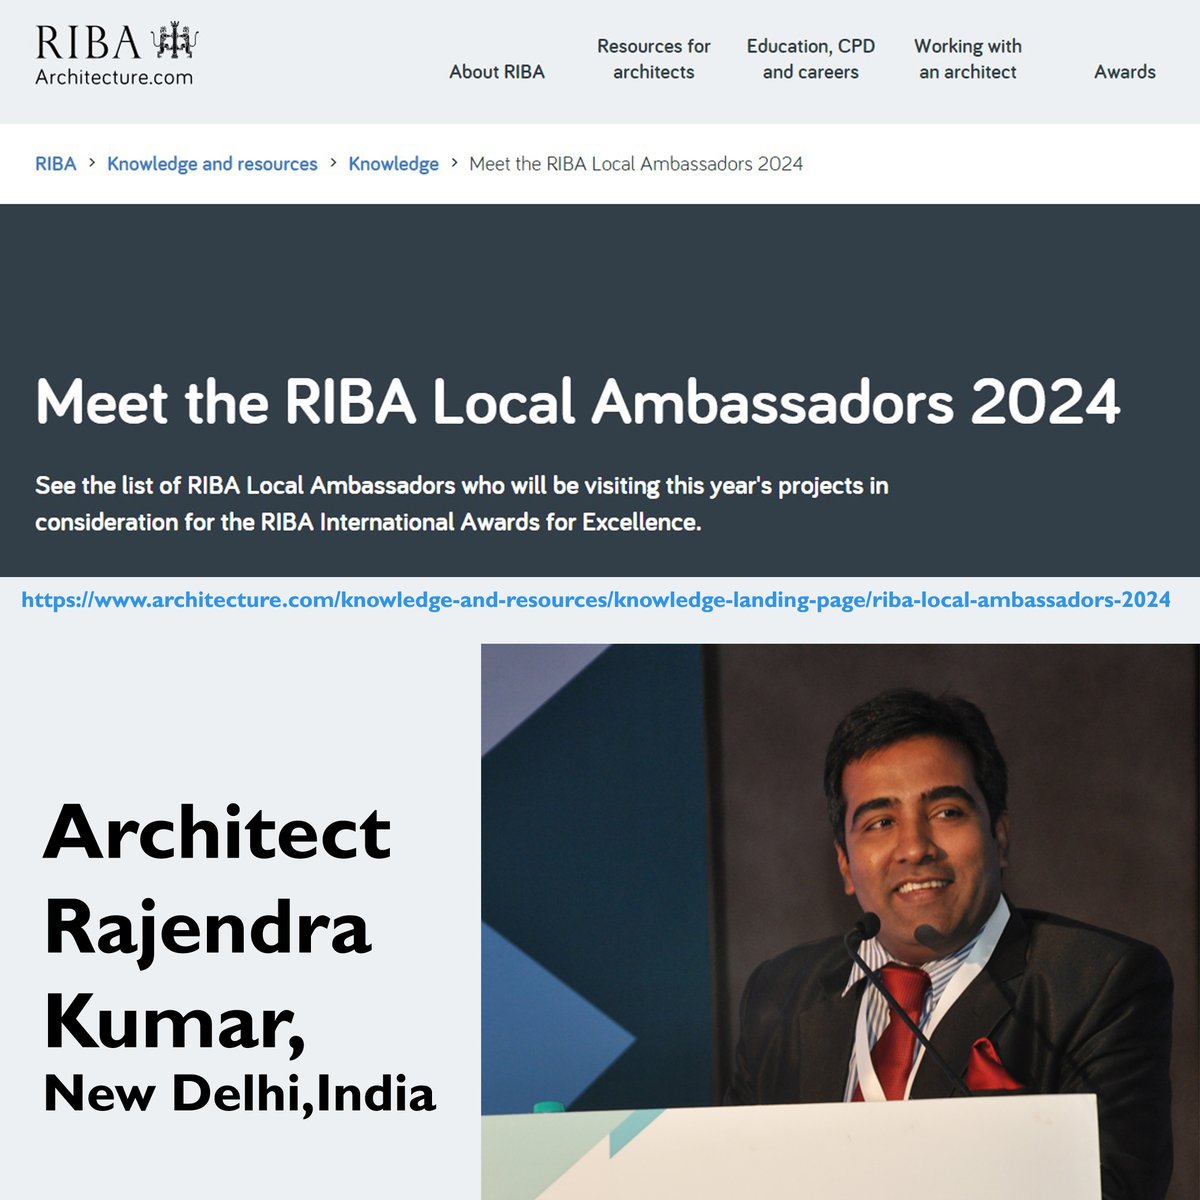 With immense pleasure, i inform that I am appointed as Local Ambassador of Royal Institute of British Architects (RIBA), UK.
#RIBAawards @RIBA